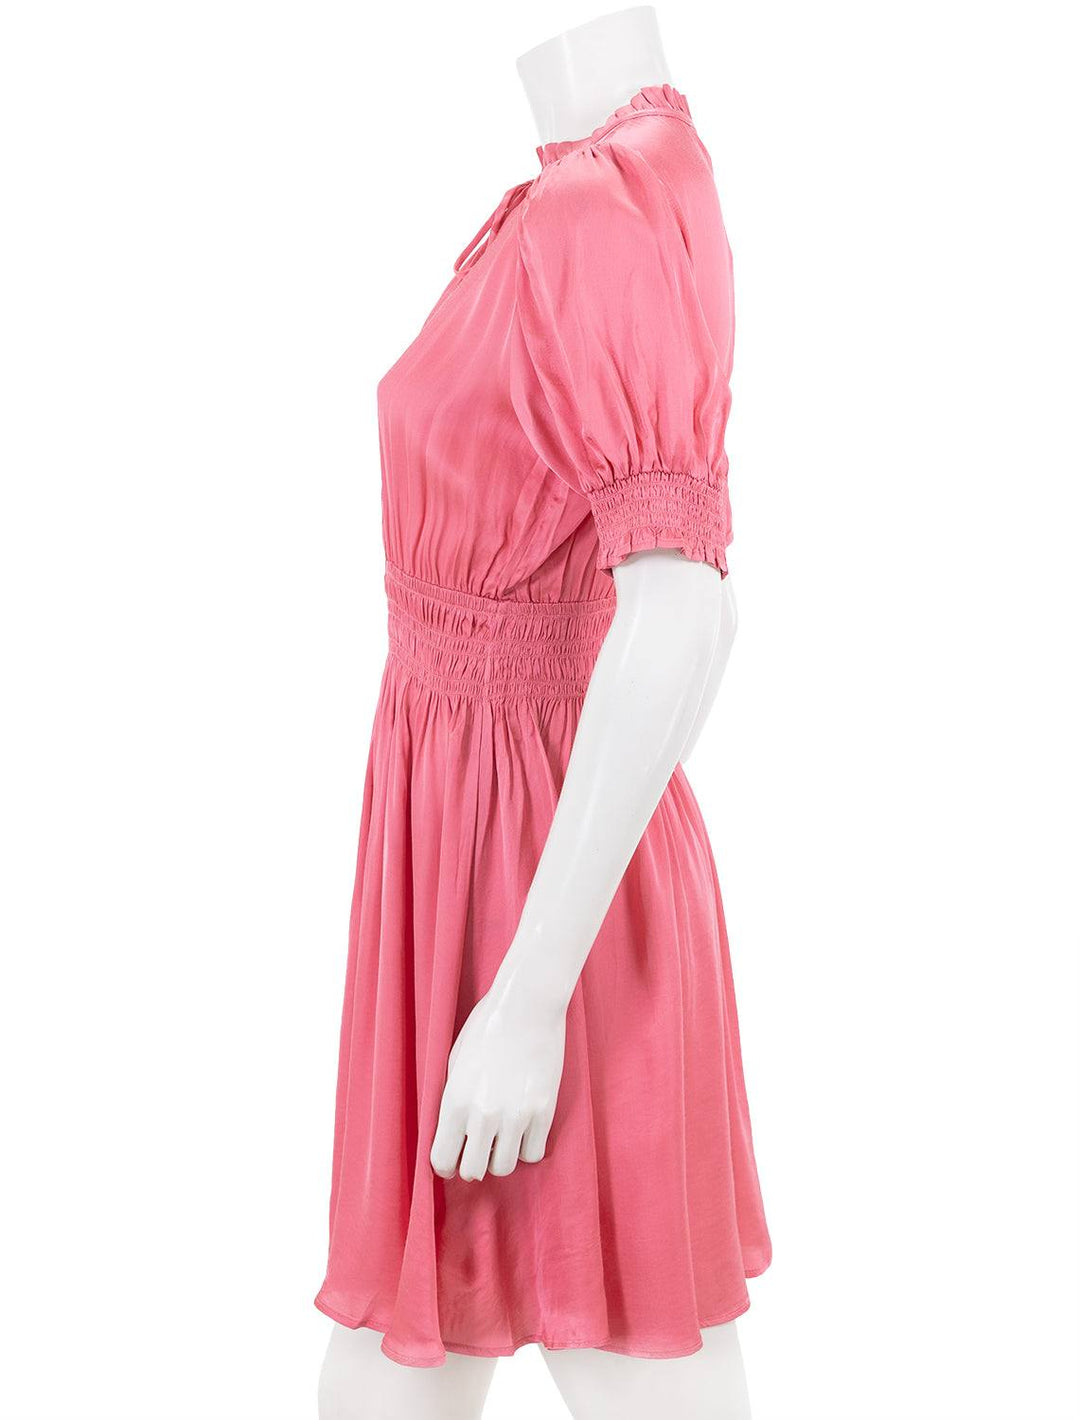 Side view of Suncoo's chaden dress in rose.